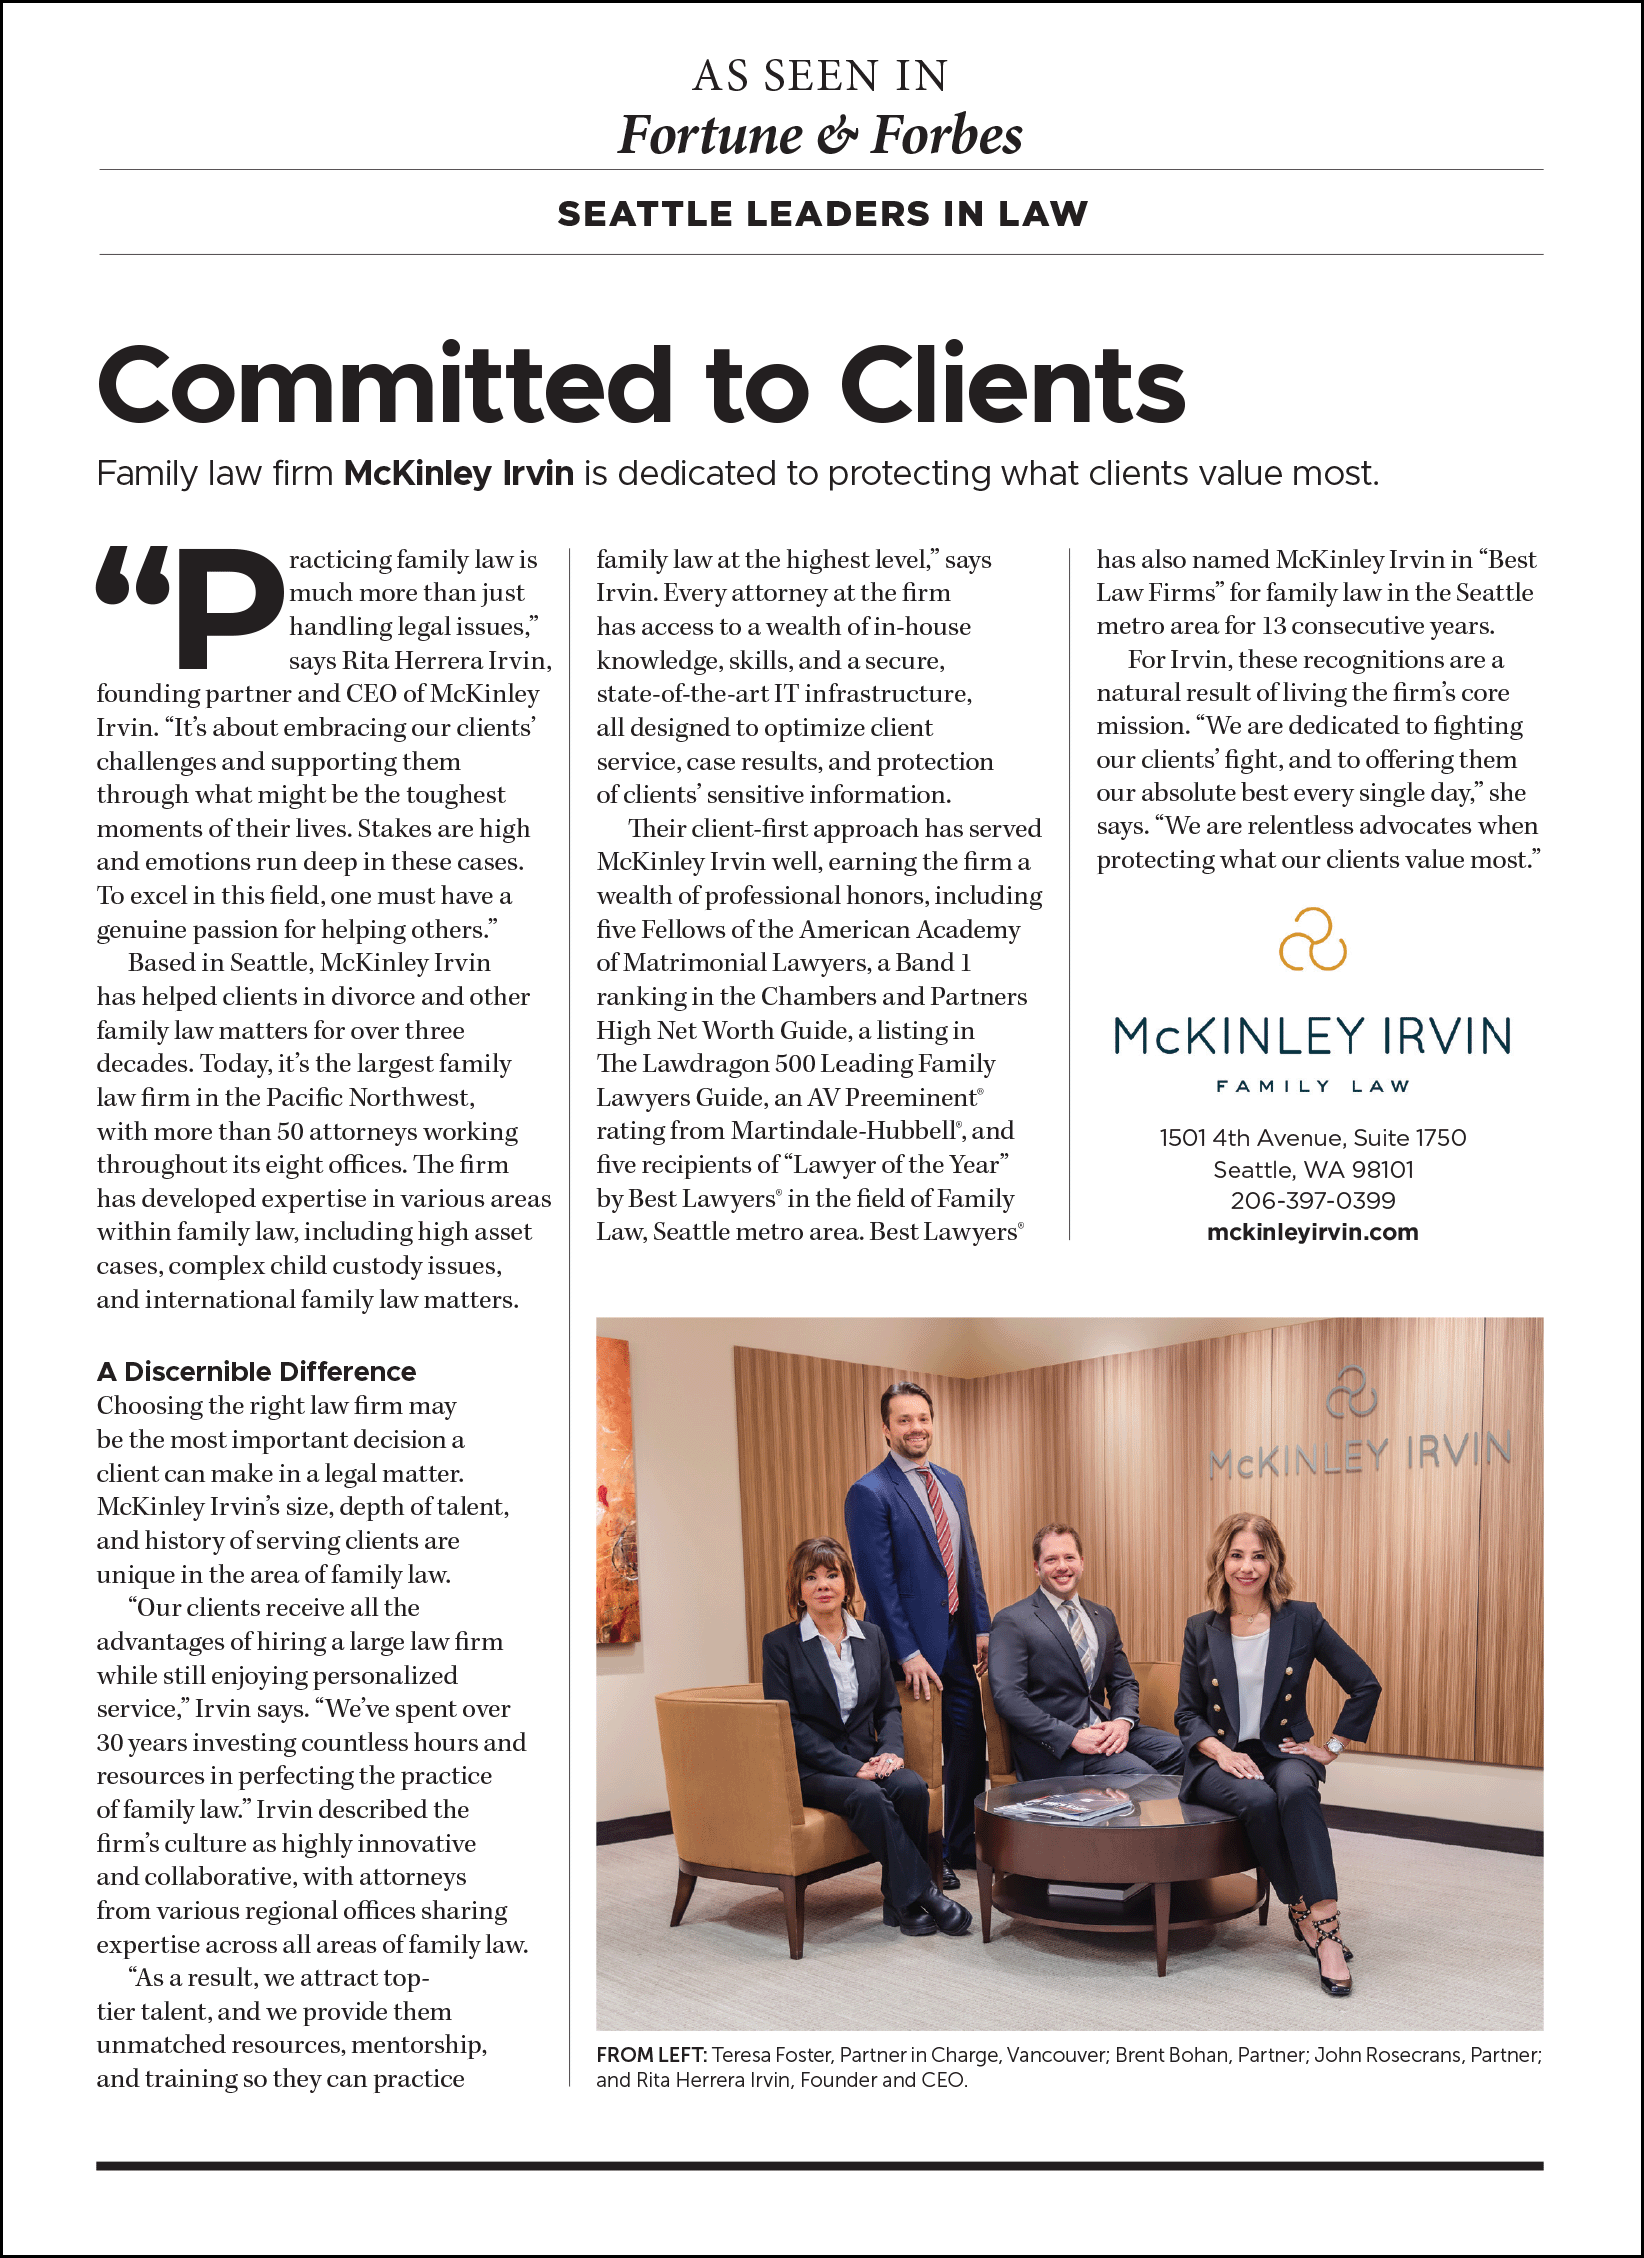 Forbes & Fortune: McKinley Irvin "Committed to Clients"